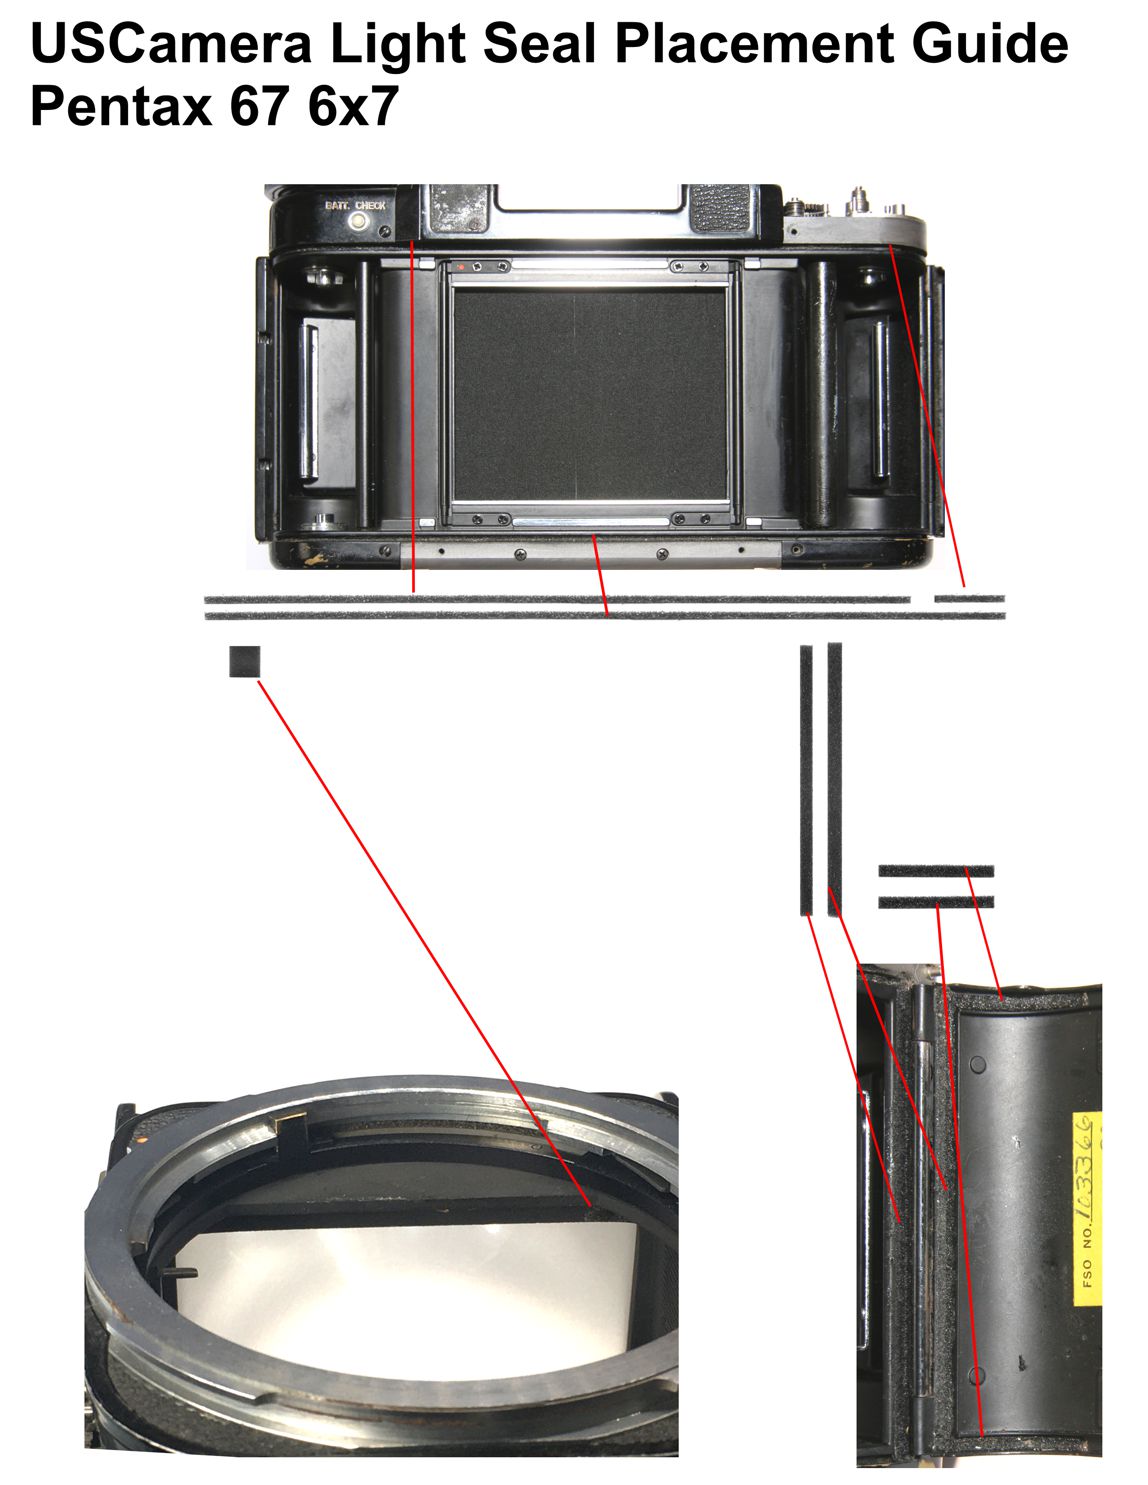 USCamera Light Seal Placement Guide | Pentax 67 | 6x7